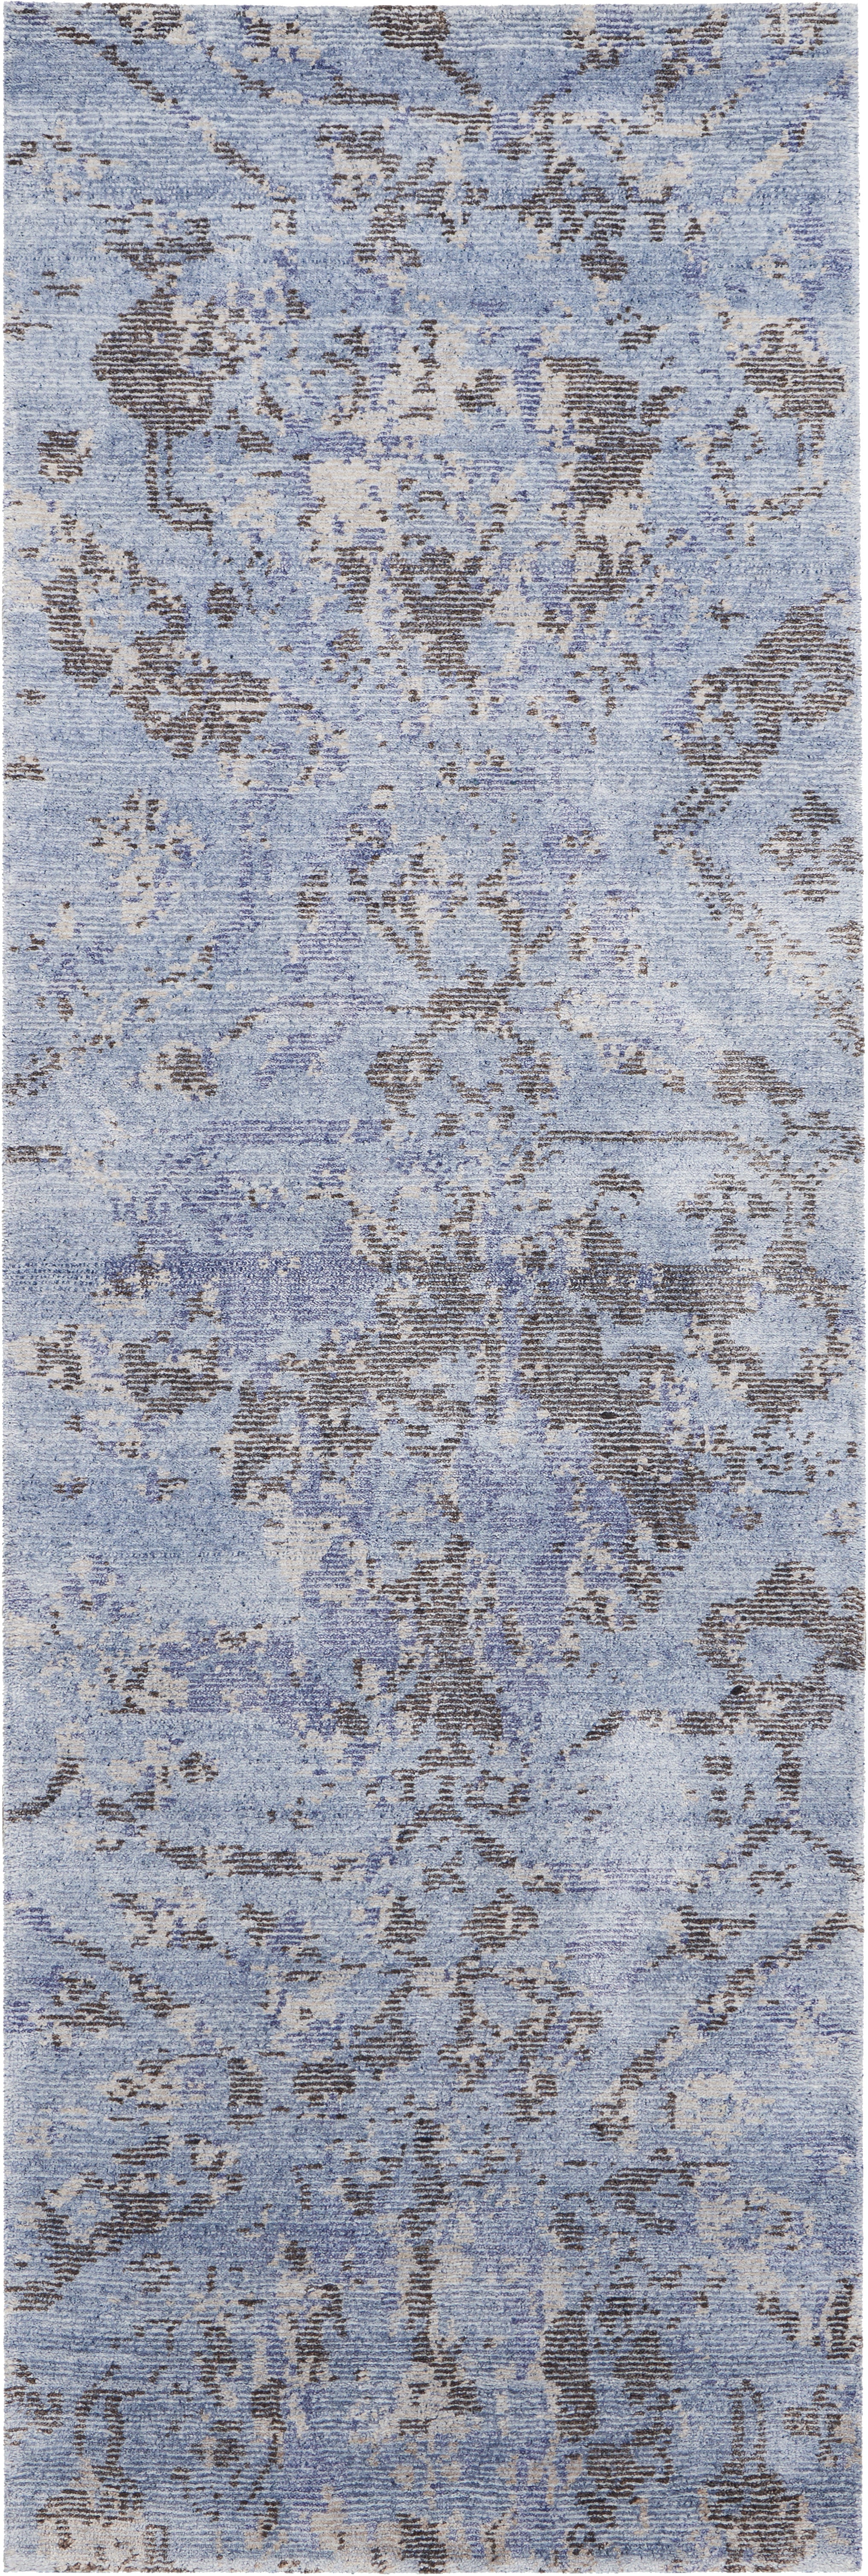 Rectangular blue rug with distressed abstract pattern, perfect for modern interiors.